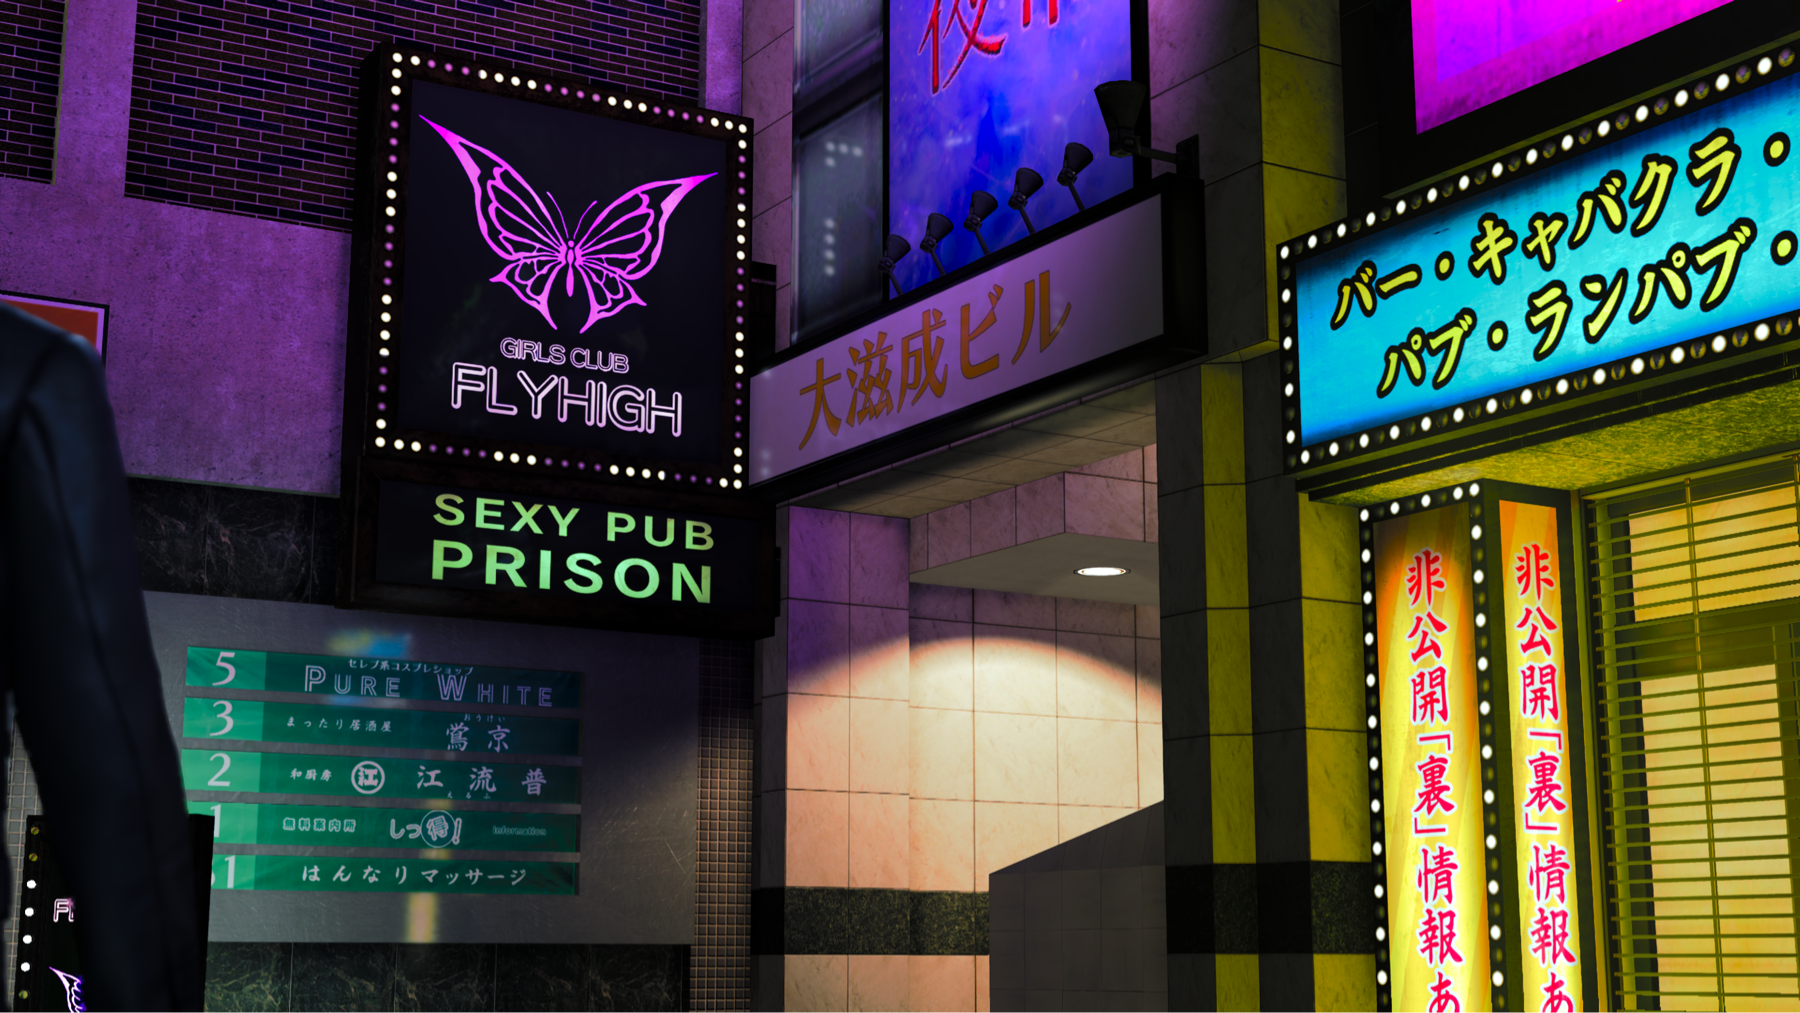 A neon-lit urban scene at night featuring signs for various entertainment venues, including &ldquo;GIRLS CLUB FLYHIGH,&rdquo; &ldquo;SEXY PUB PRISON,&rdquo; and other illuminated billboards with Japanese text, indicative of a nightlife district.